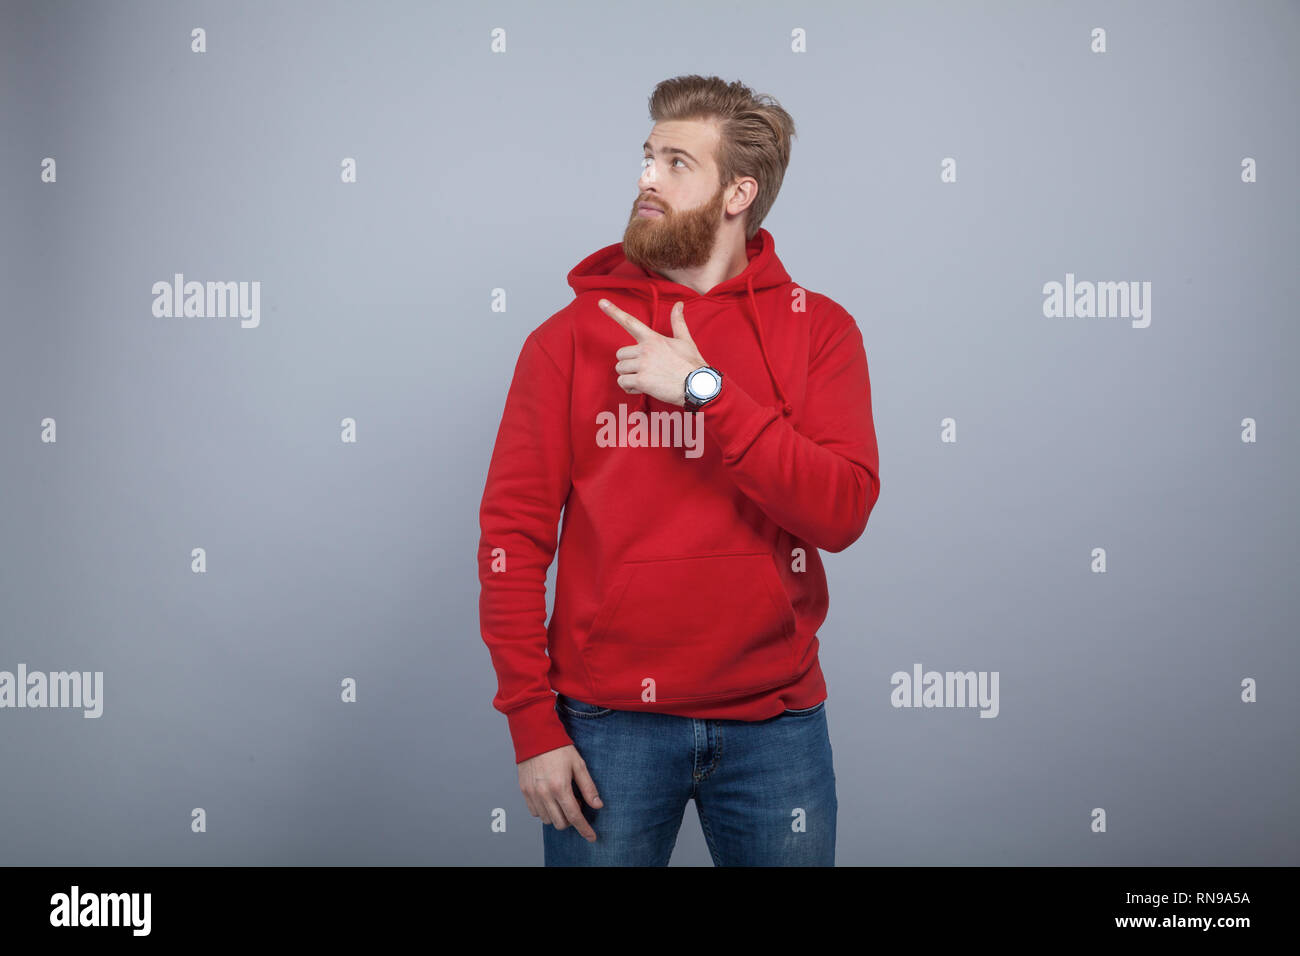 young handsome bearded man wearing red sweatshirt standing on the grey background and pointing his finger on the left side and looking there with the  Stock Photo